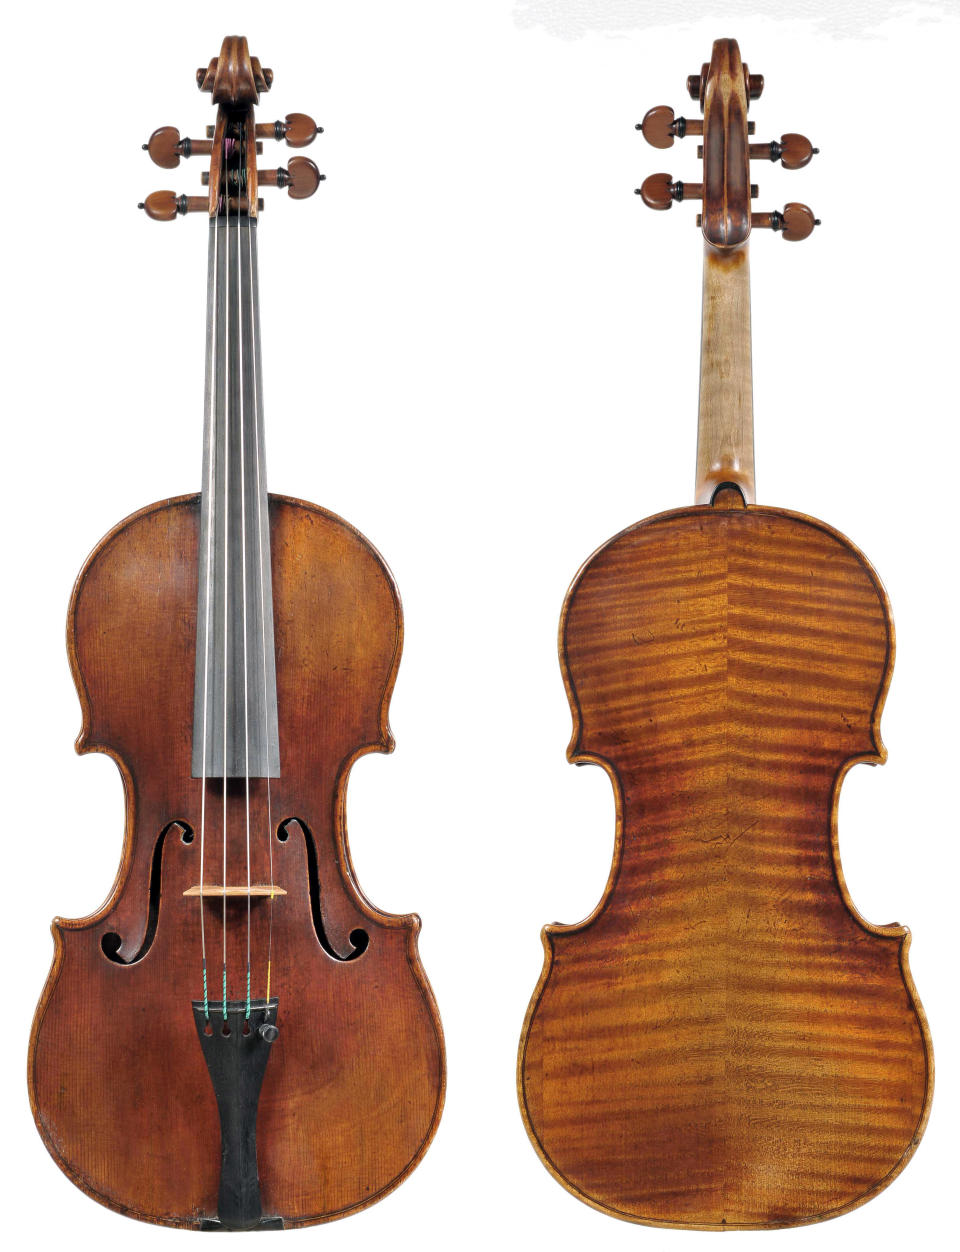 In this undated photo provided by the Milwaukee Symphony Orchestra is the 300-year-old Stradivarius violin that was stolen from MSO concertmaster Frank Almond. Police said Wednesday, Feb. 5, 2014 three people have been arrested in connection with the theft of the multi-million-dollar instrument that was on loan to Almond. Authorities say a robber used a stun gun on Almond and took the instrument from him in a parking lot. (AP Photo/Milwaukee Symphony Orchestra)